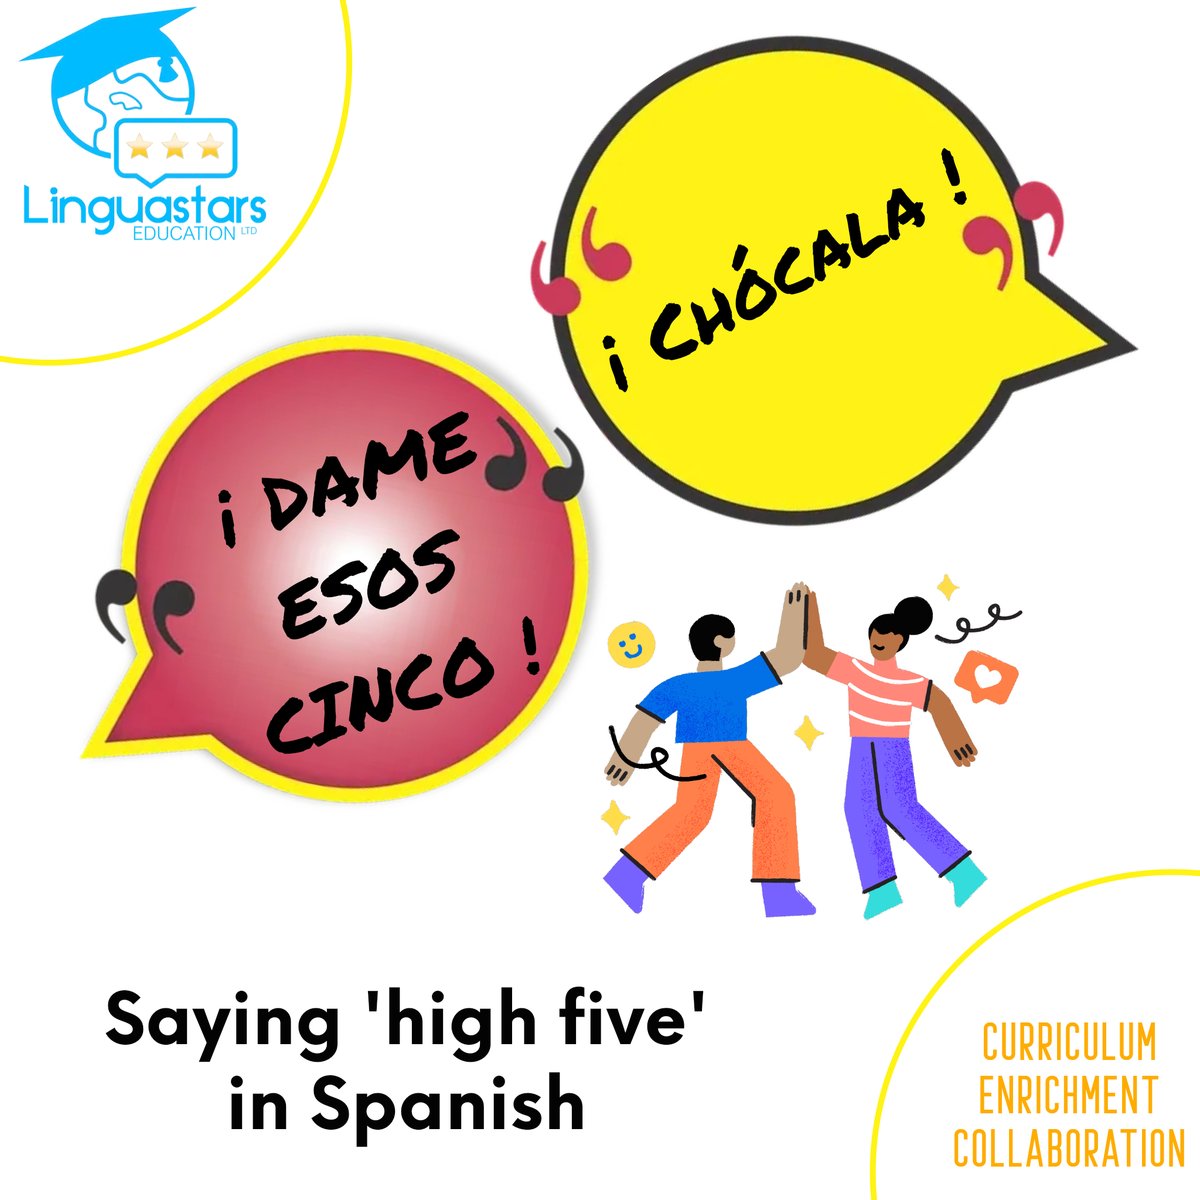 💡Did you know it's #NationalHighFiveDay today? Make someone's day by saying it in Spanish! #languages #educhat #primary #school #teach #learn #edutwitter